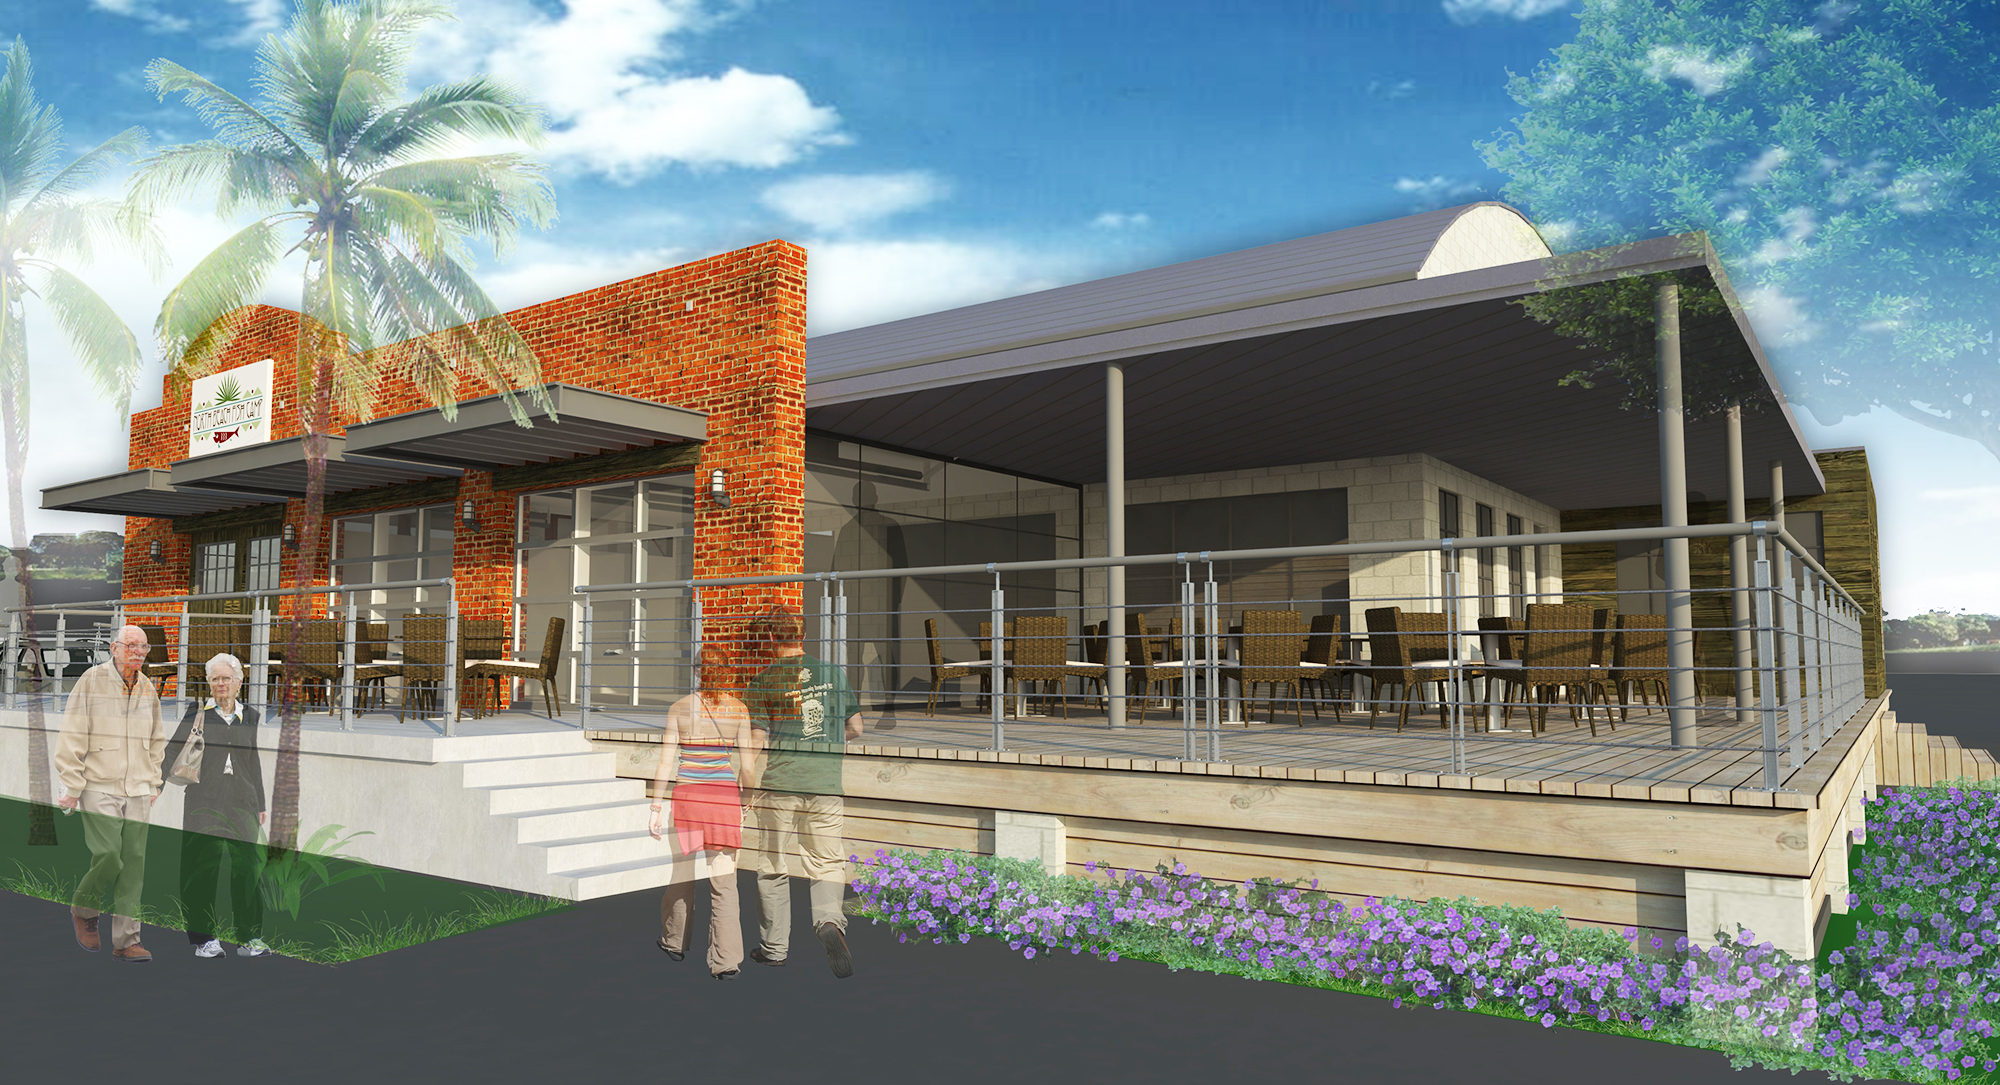 Southern Table Hospitality plans to open a fourth location St. Augustine by mid-January.